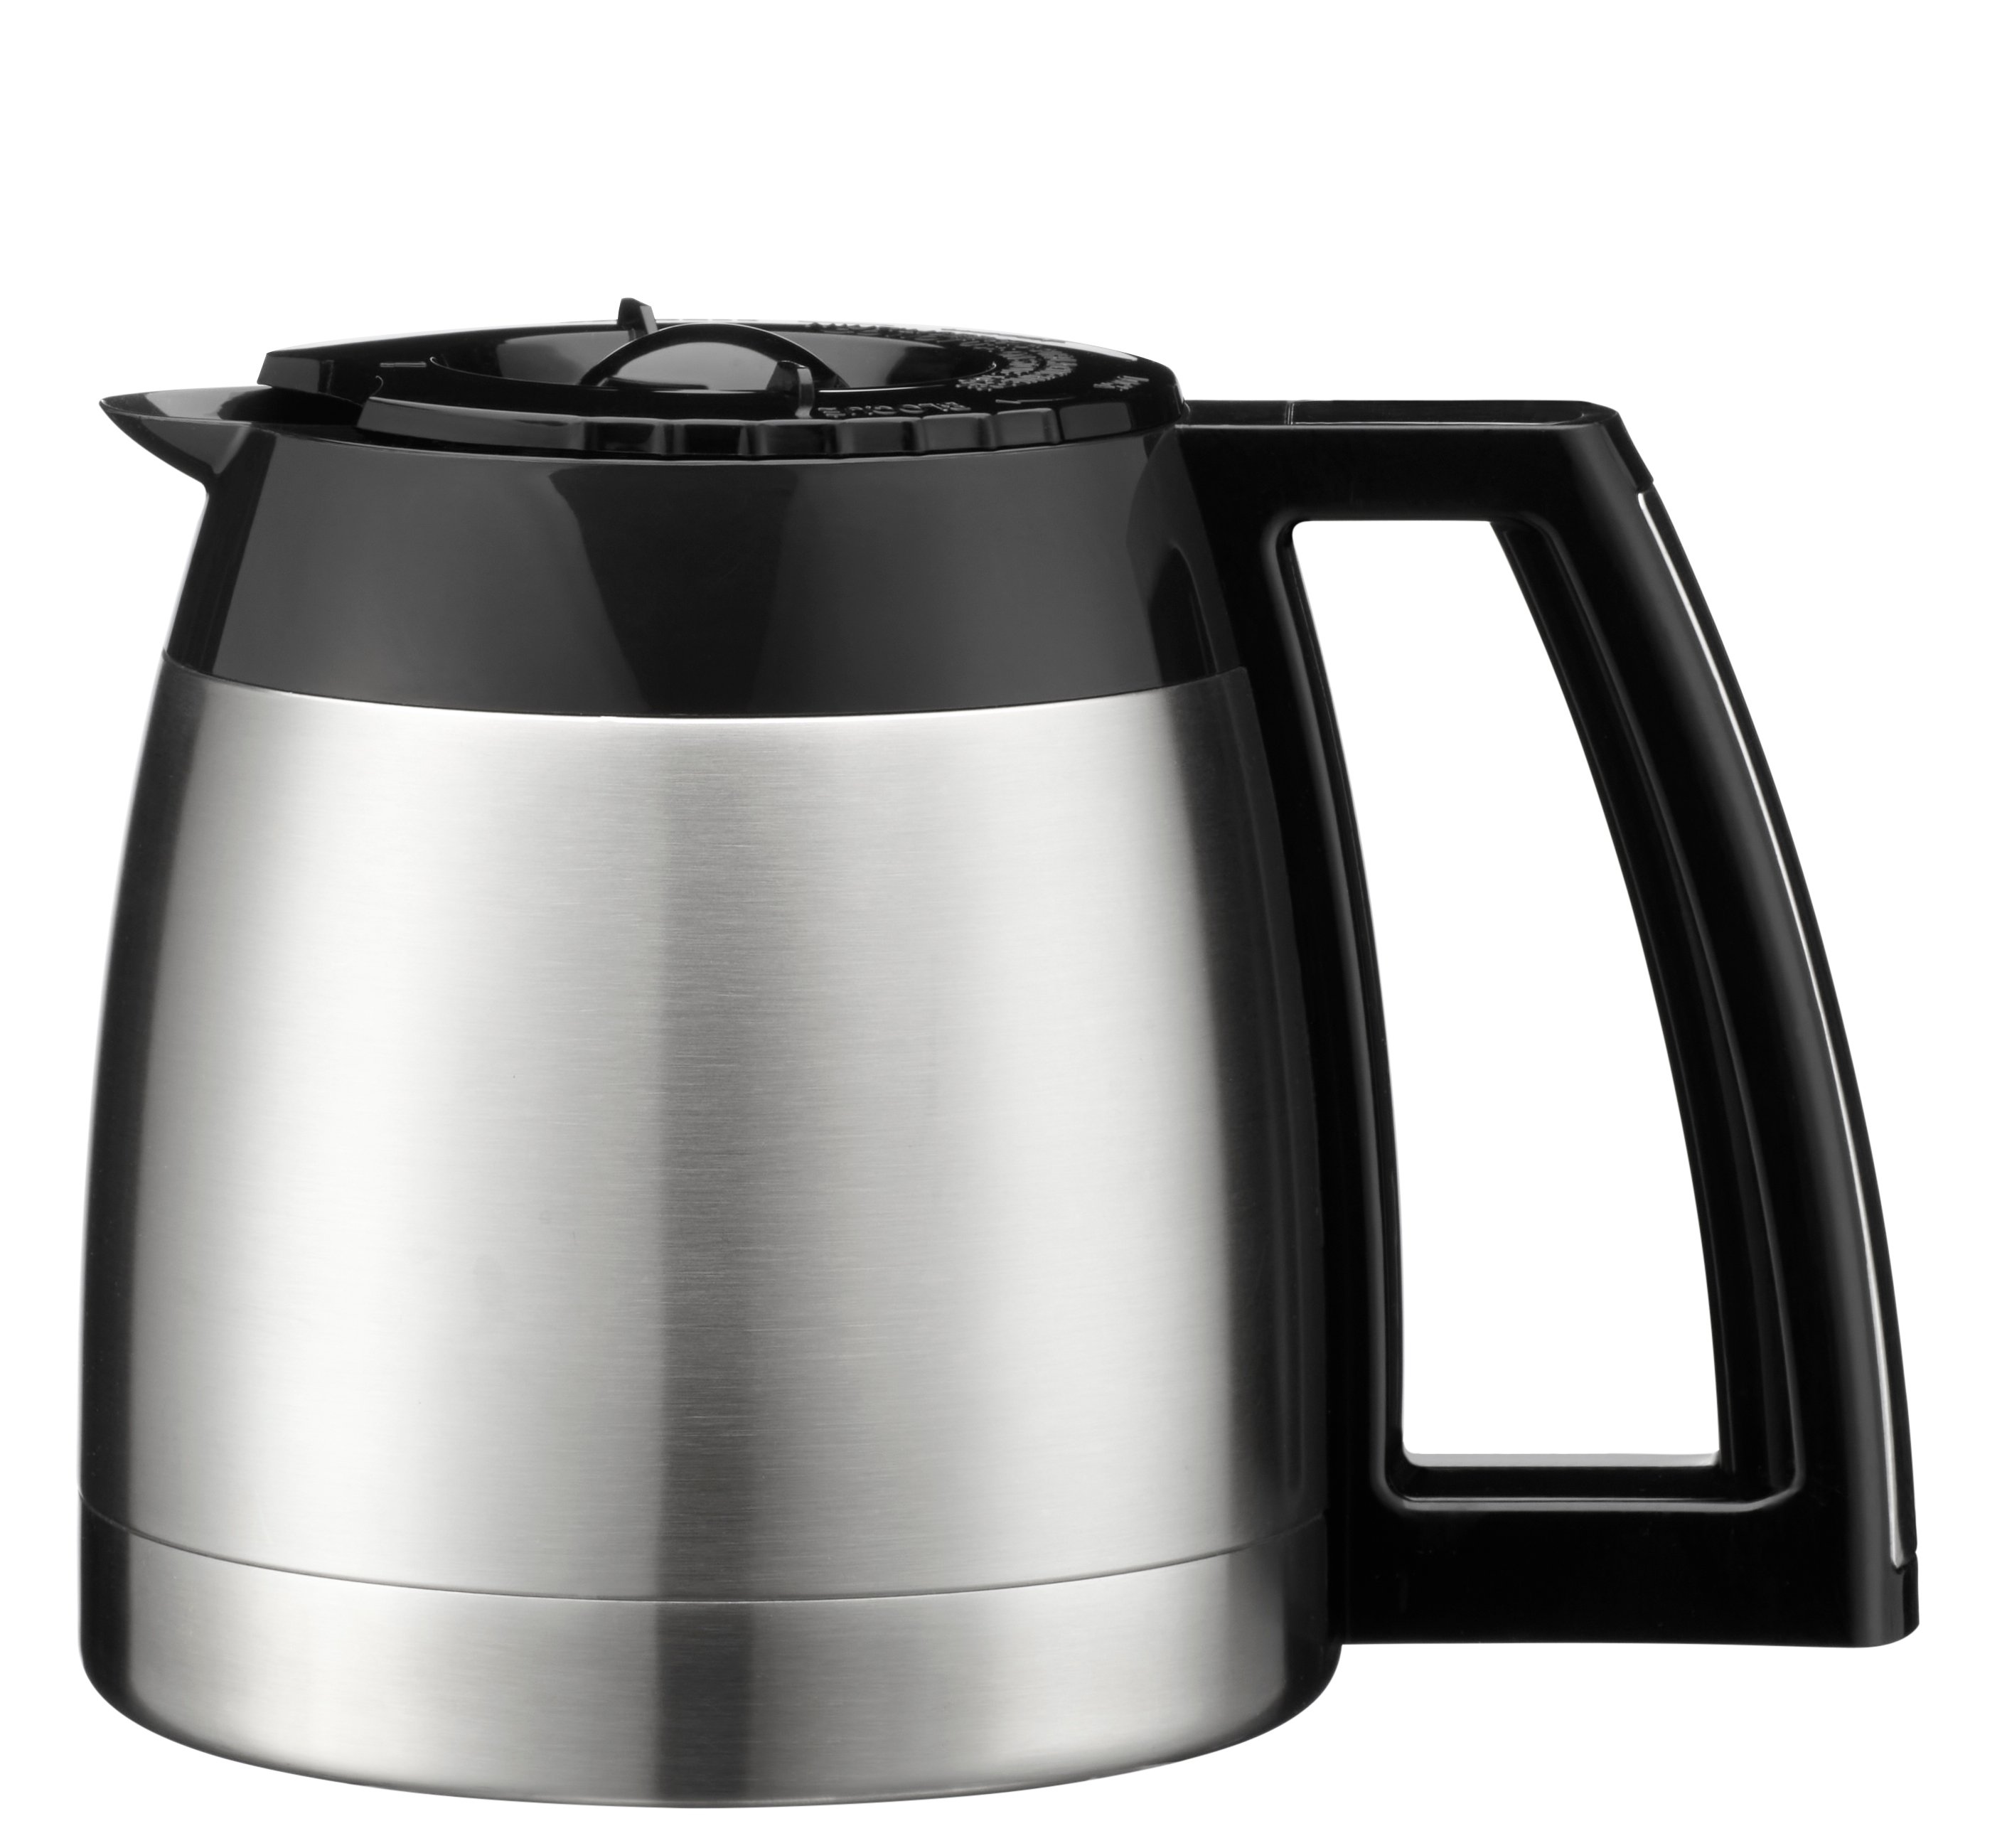 Cuisinart Thermal Carafe for SS-20